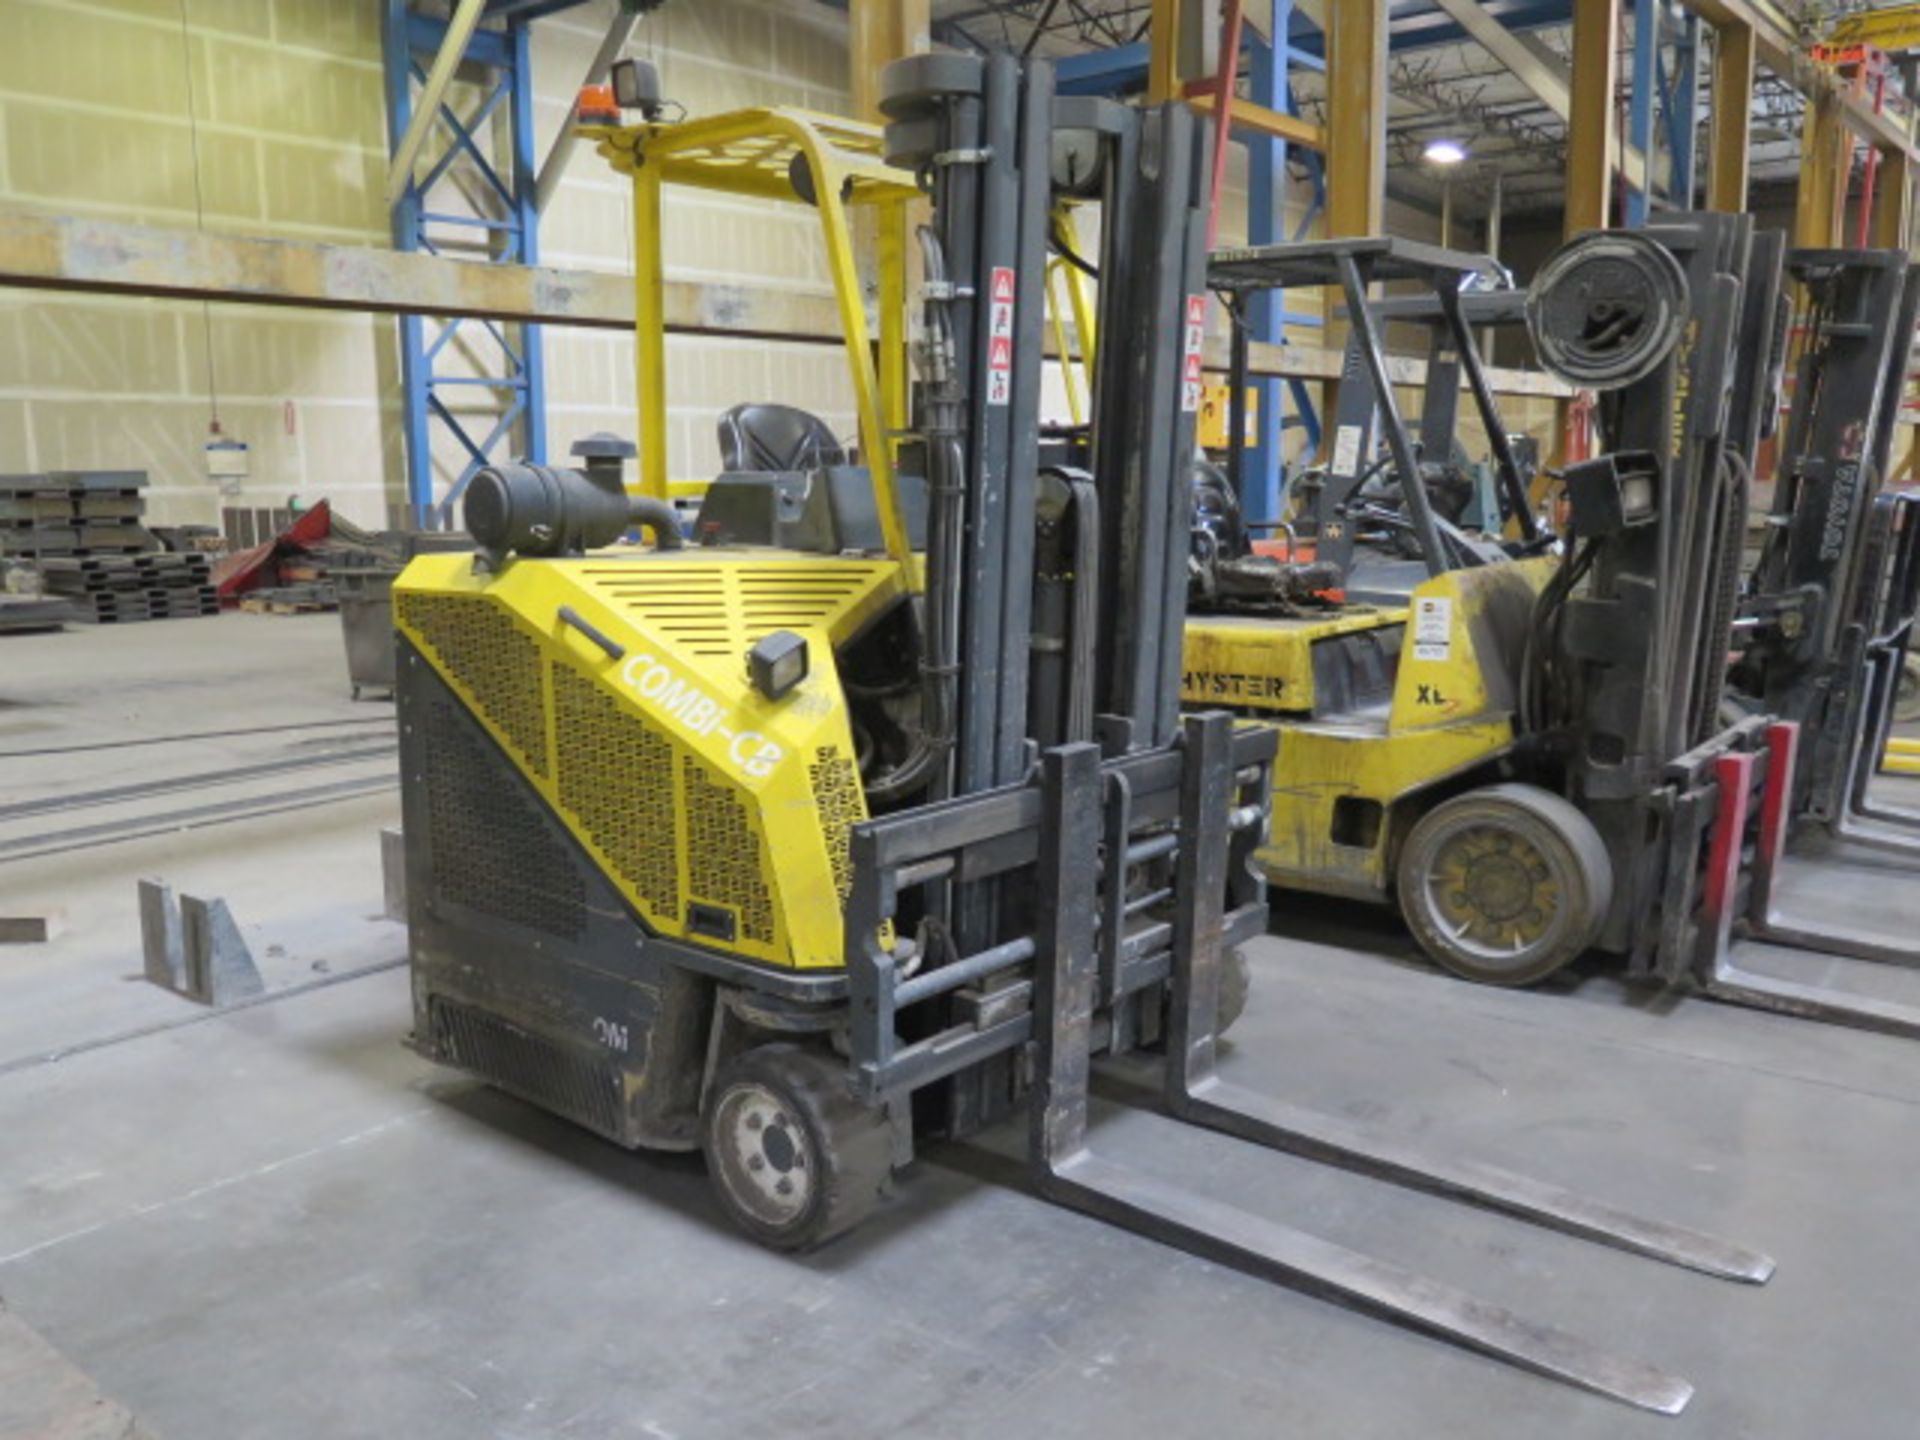 2017 CombiLift C6000CB 6,000 Lb Cap LPG Comb Forklift s/n 34957 w/ Multi-Directional, SOLD AS IS